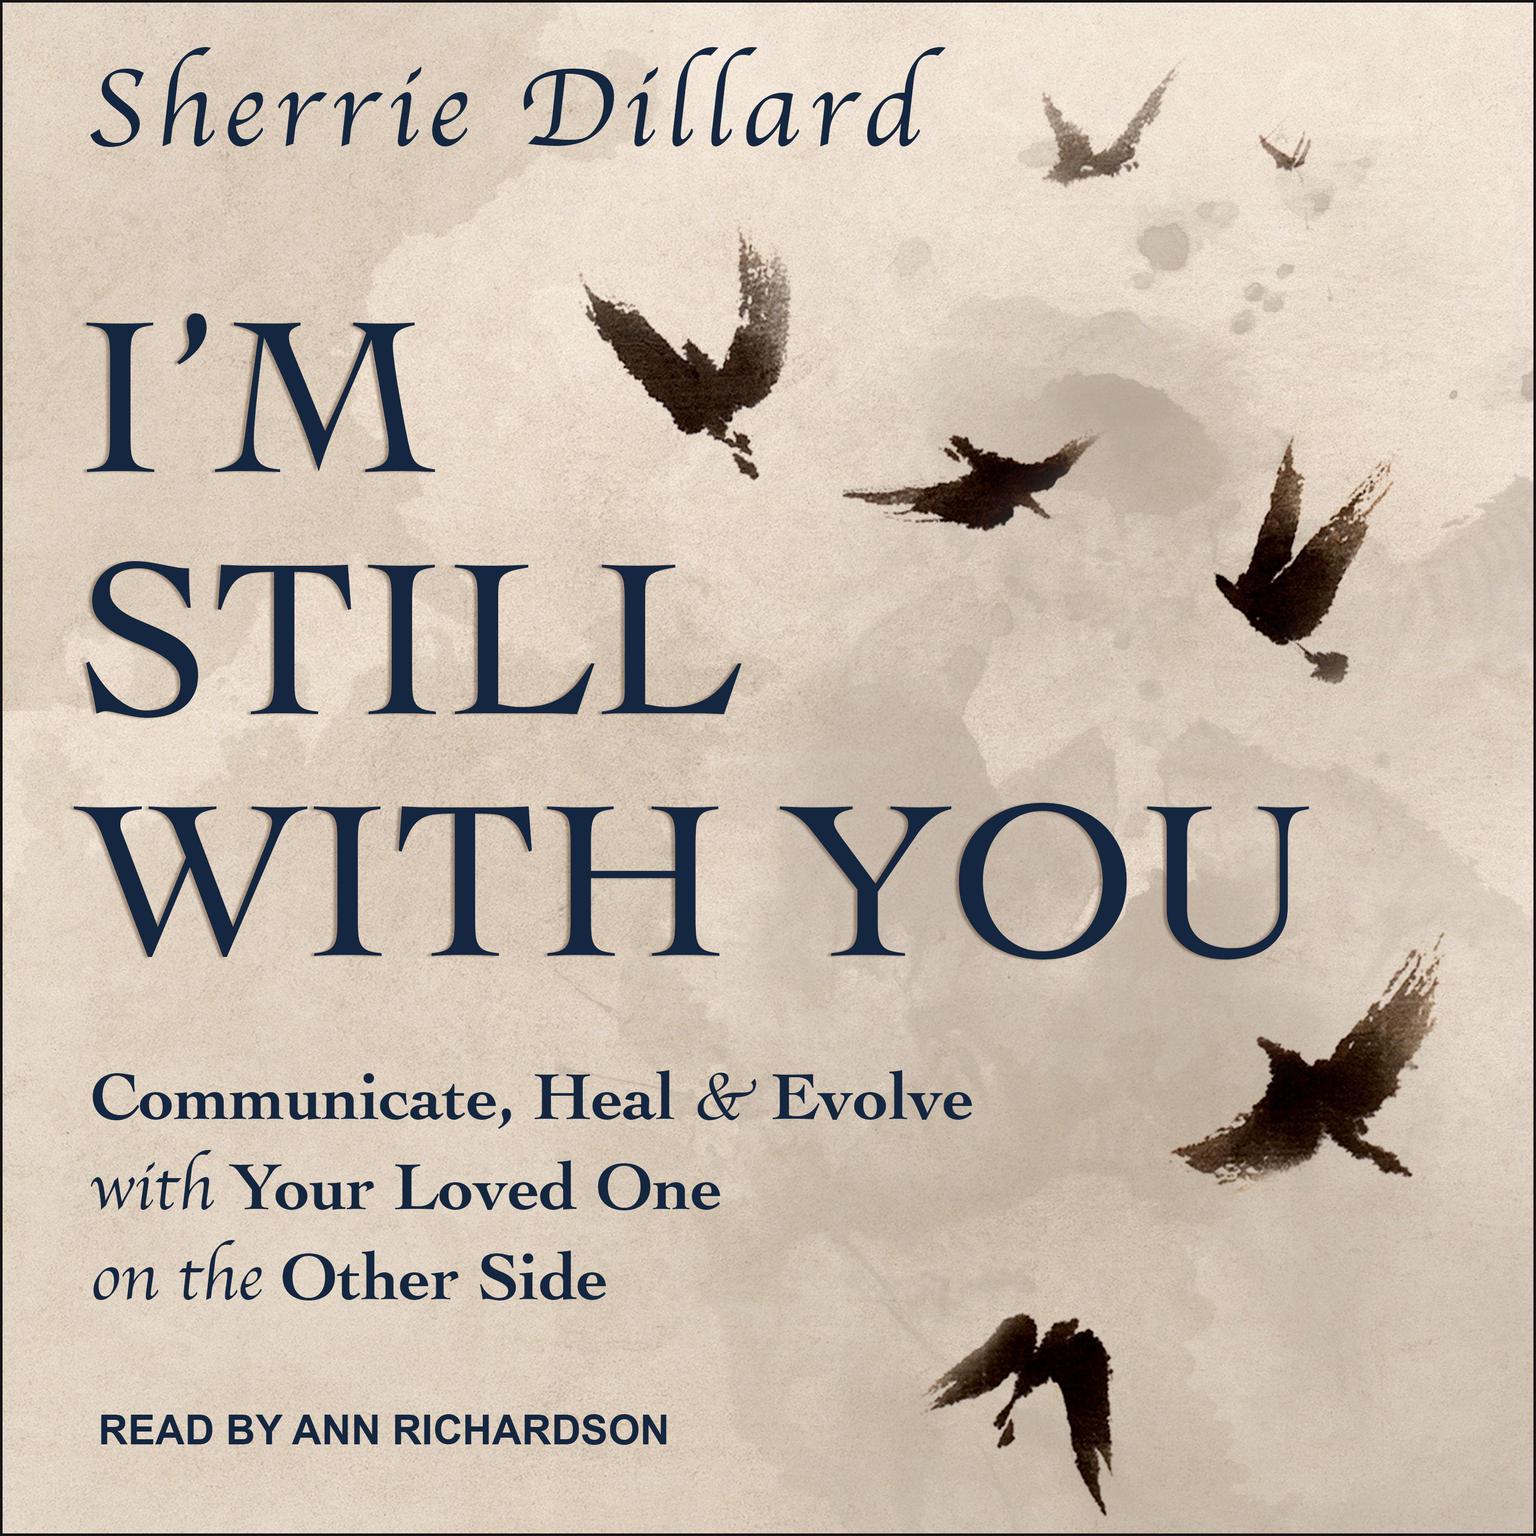 Im Still With You: Communicate, Heal & Evolve with Your Loved One on the Other Side Audiobook, by Sherrie Dillard